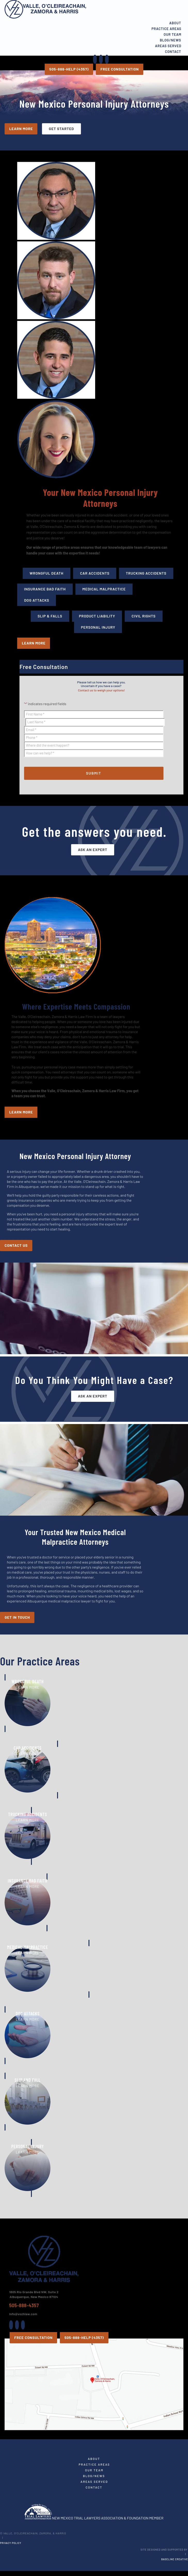 Carter & Valle Law Firm - Albuquerque NM Lawyers